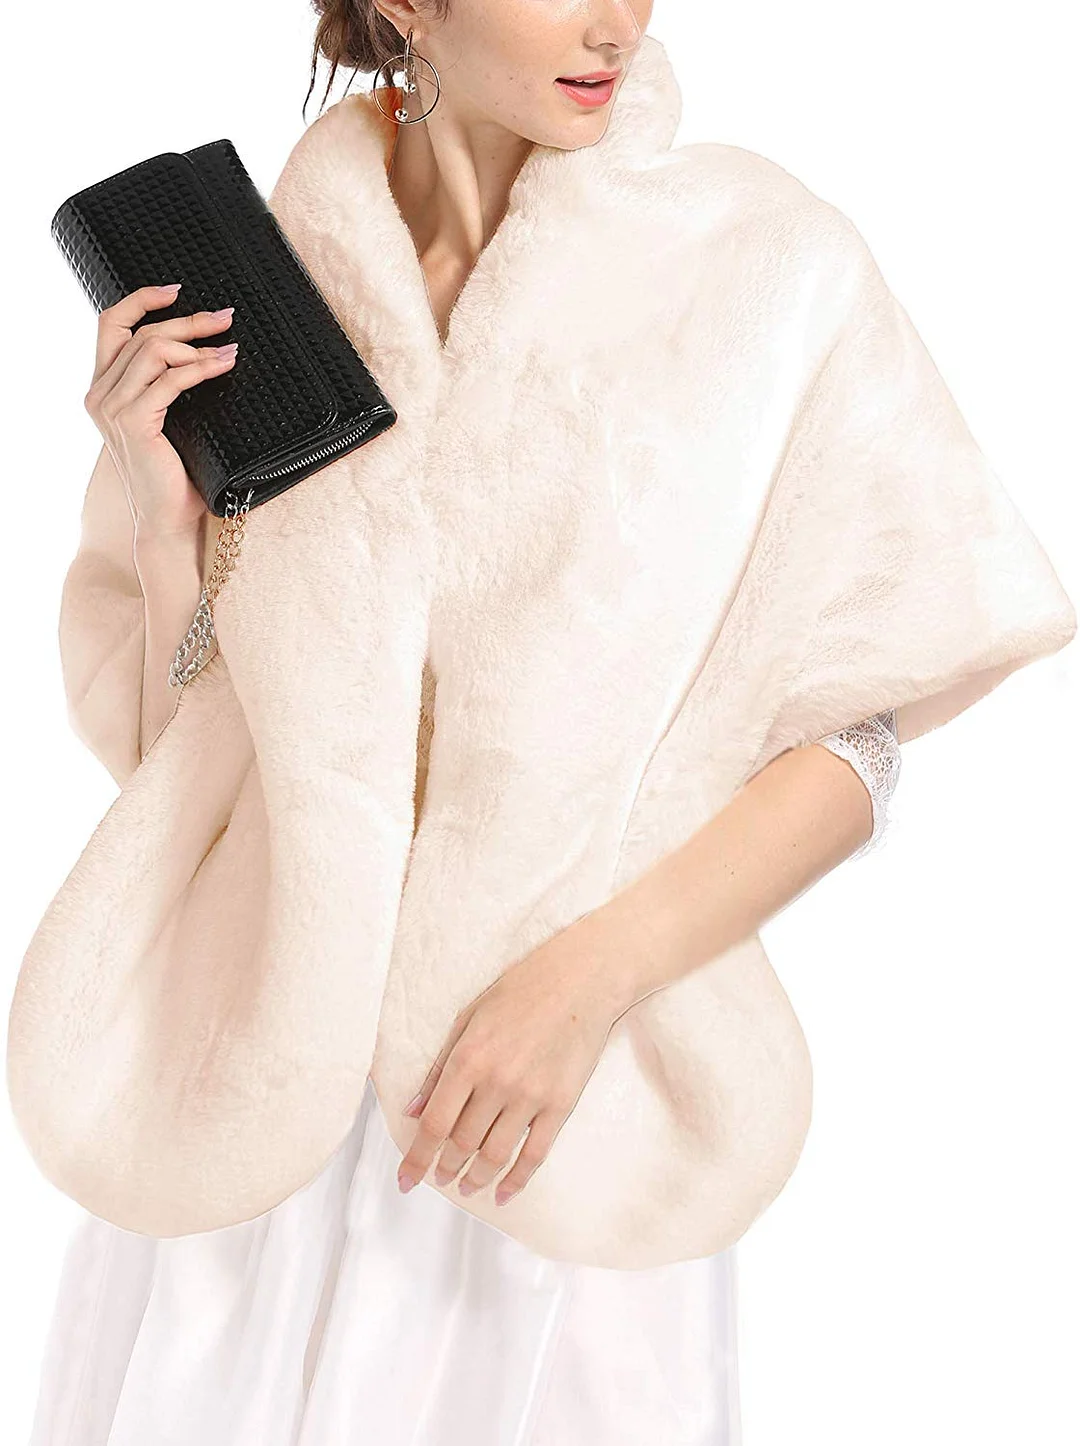 Faux Fur Wedding Wrap Shawl Long Cape Bridal Wraps and Shrugs for Winter Wedding Evening Party